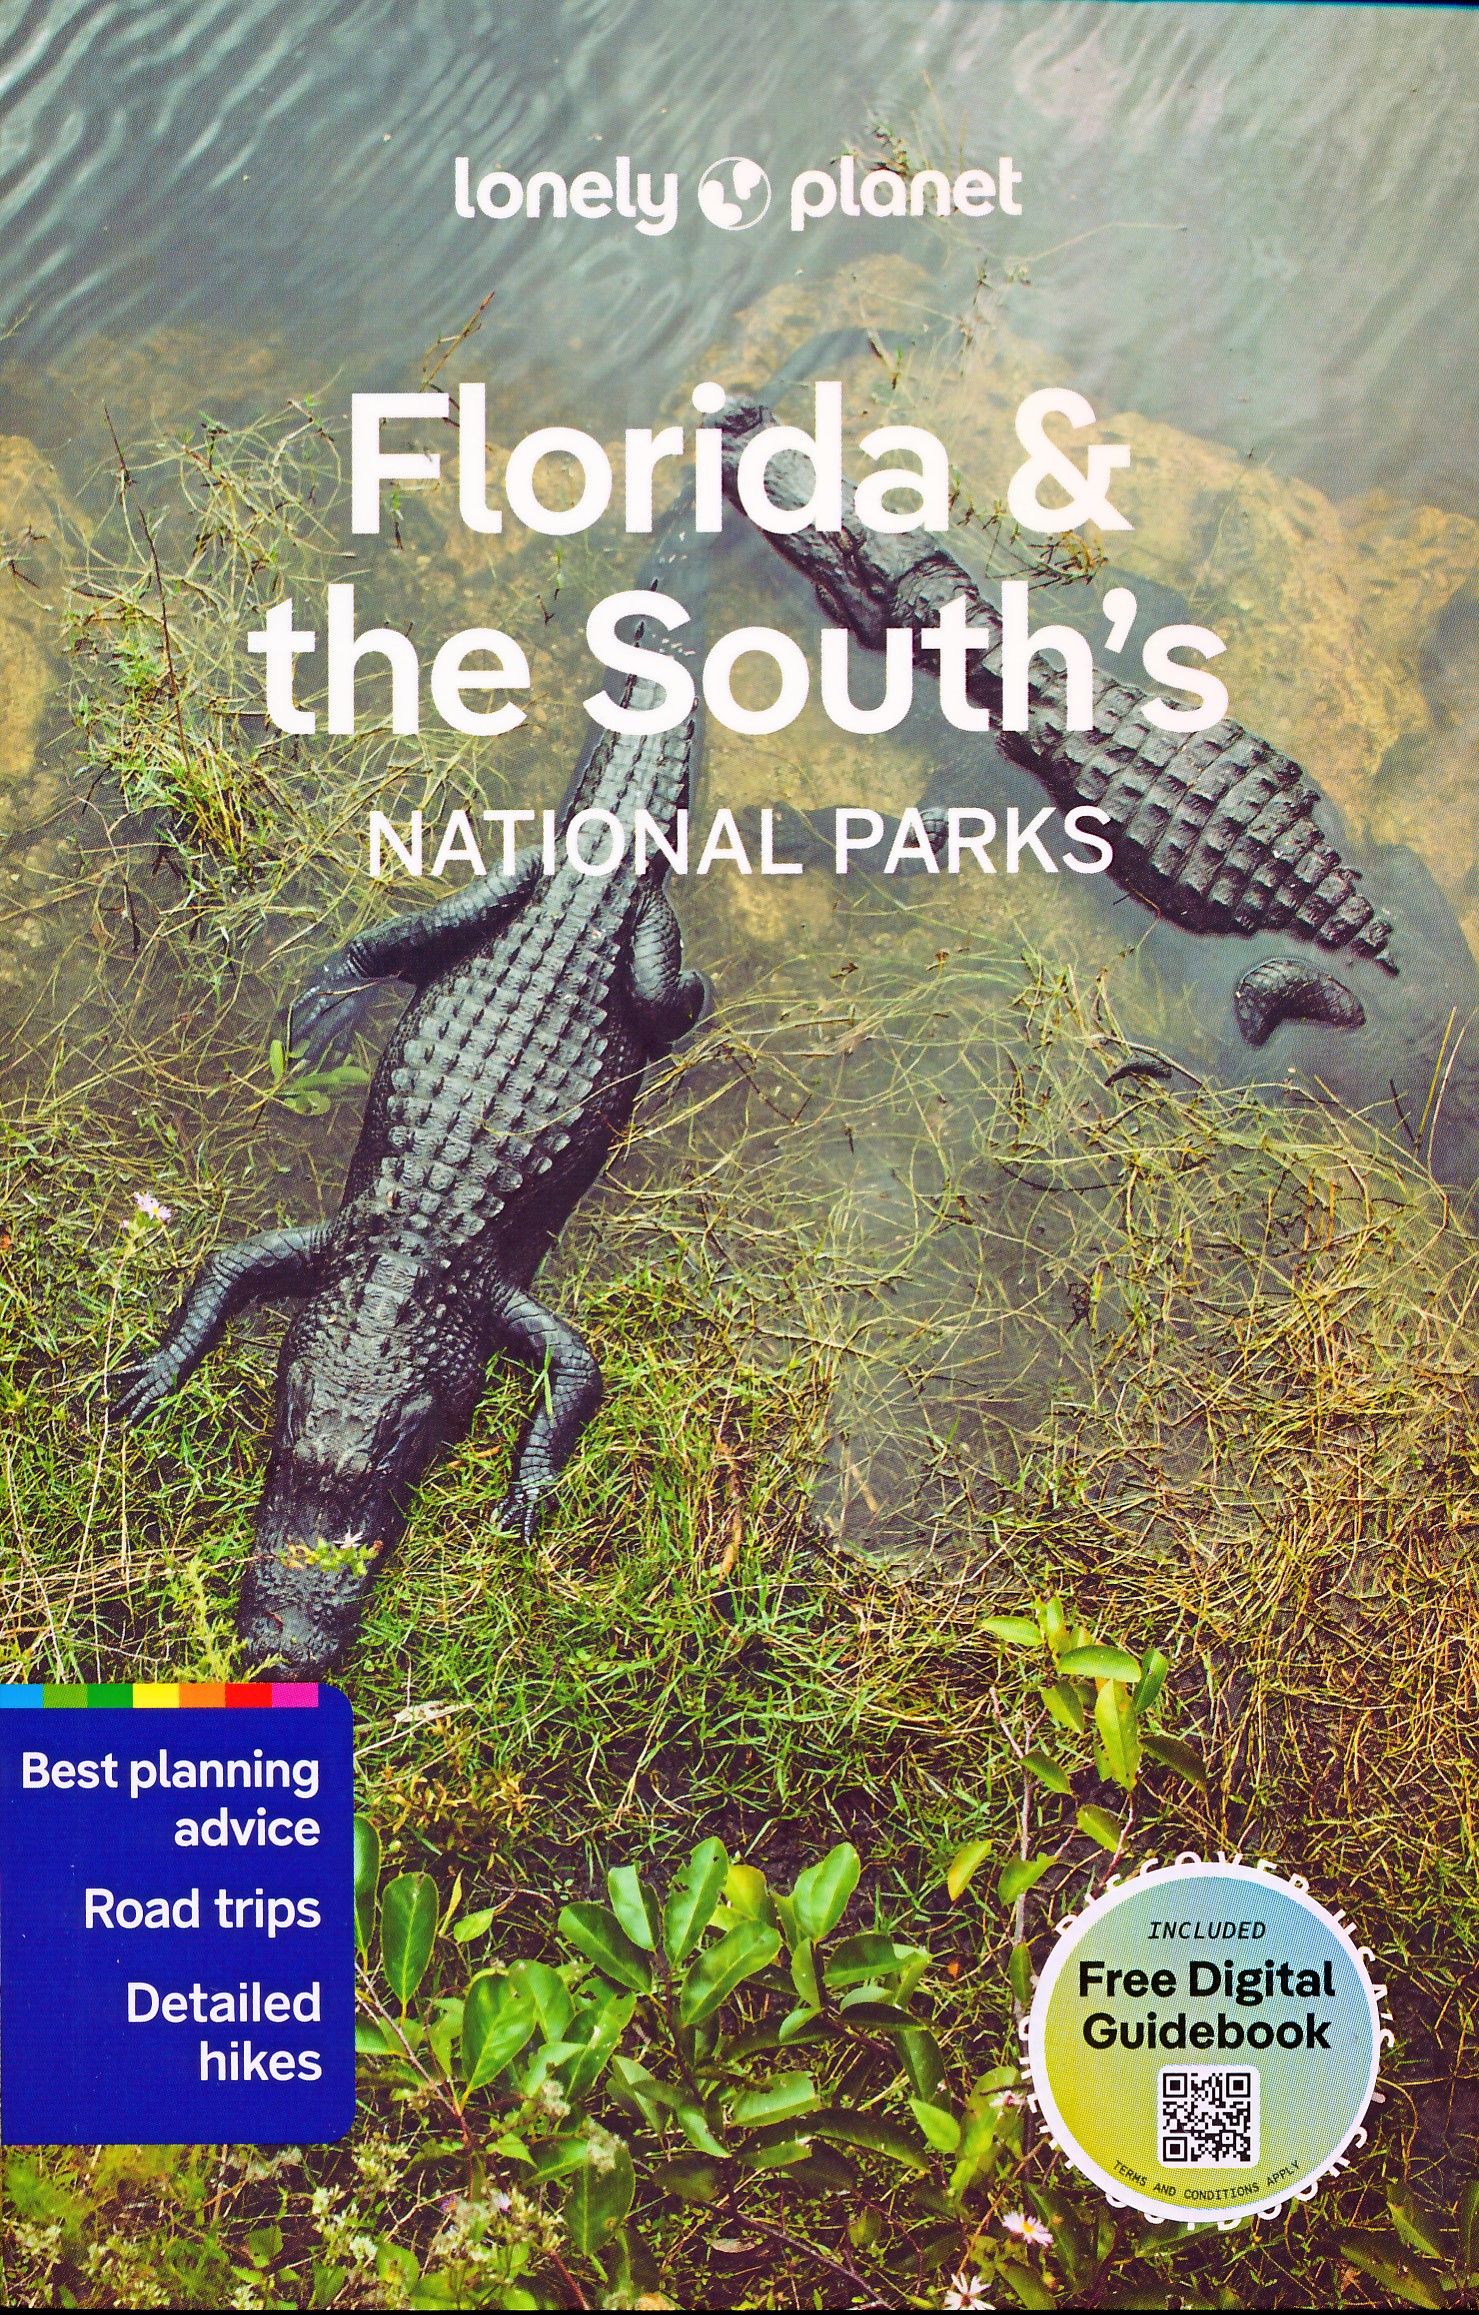 Online bestellen: Reisgids Florida and the South National Parks | Lonely Planet